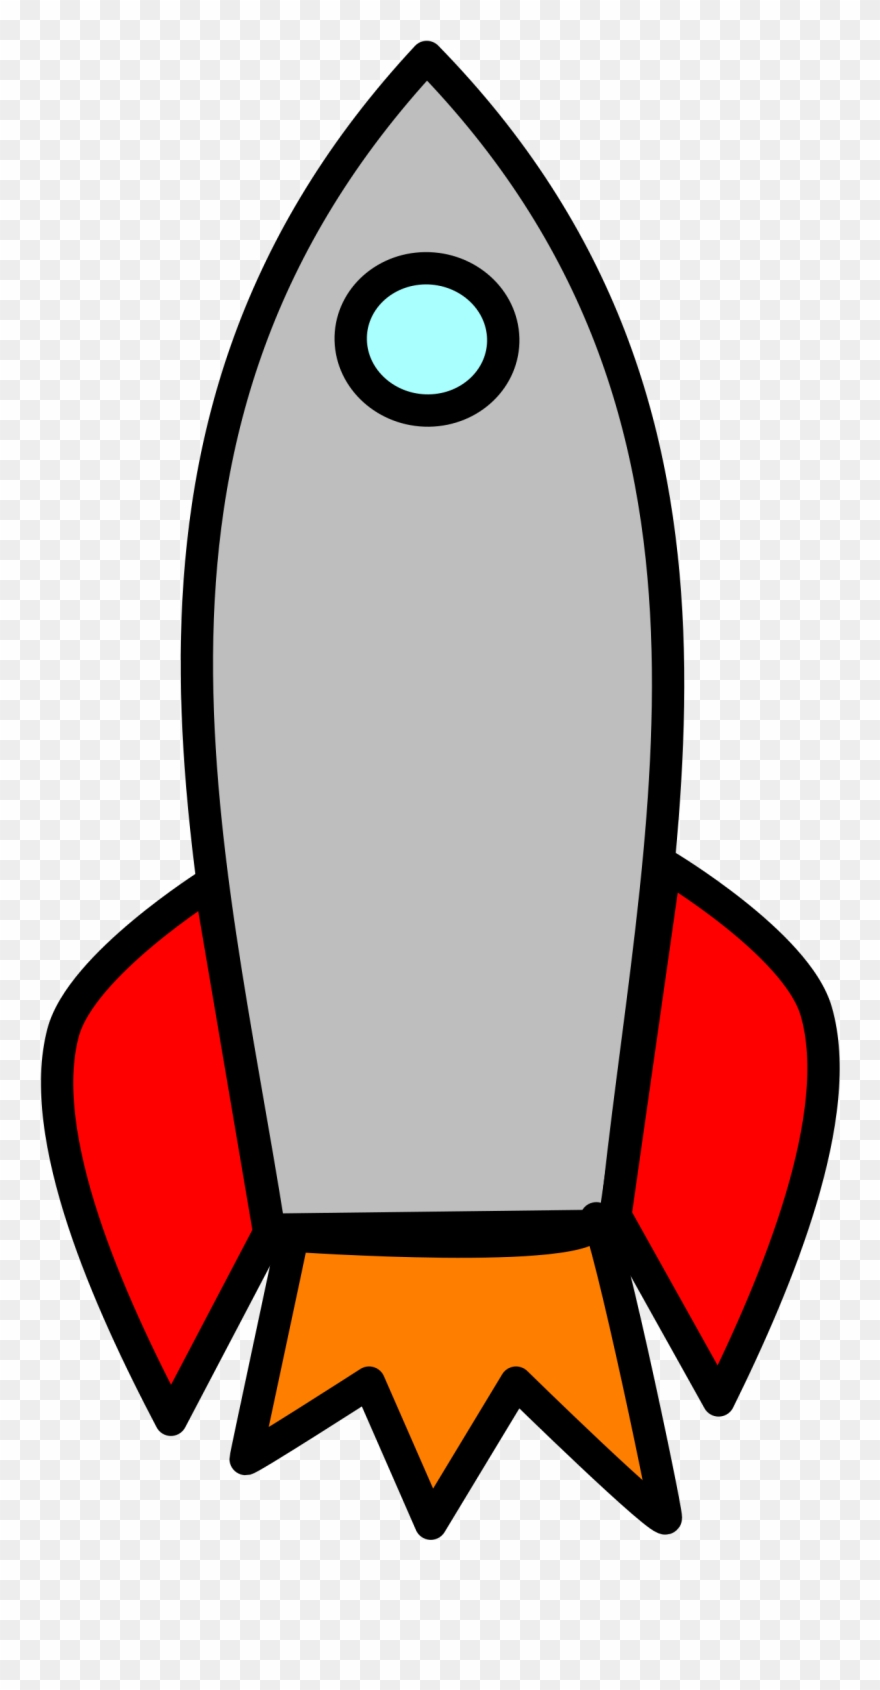 Clipart rocket window. Big image with pinclipart